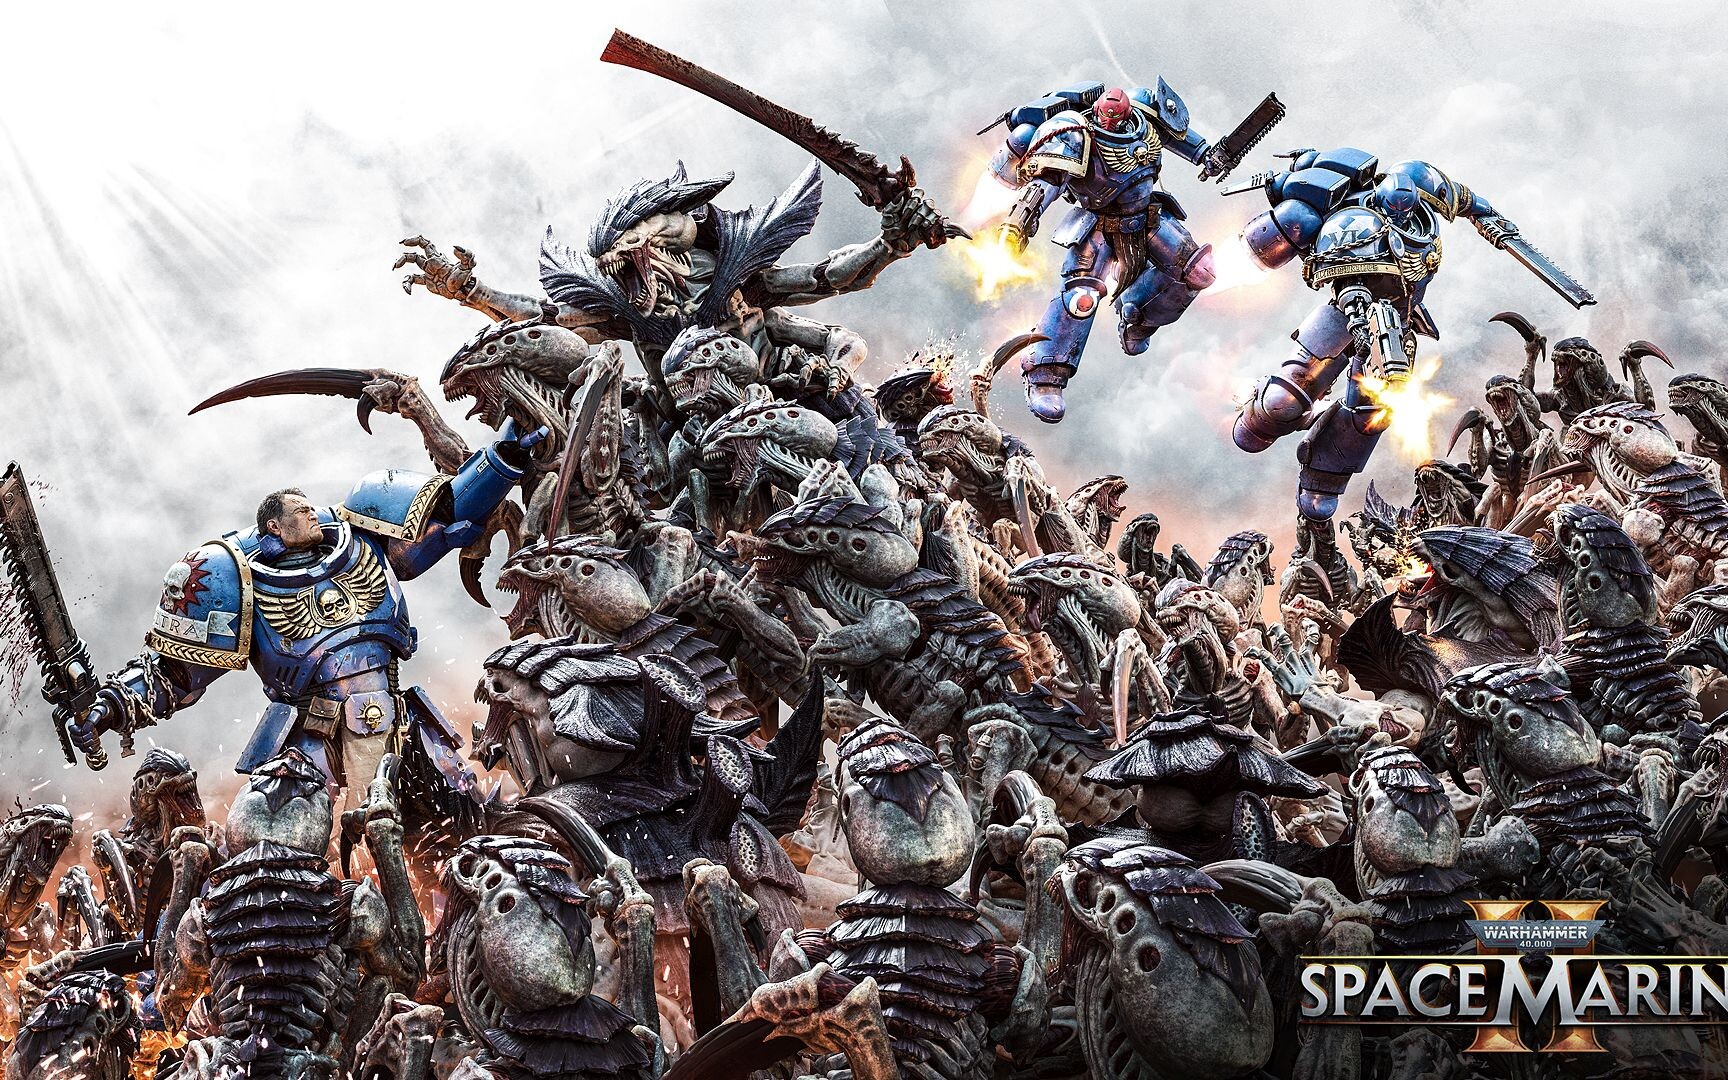 Space Marine II. See how the creators talk about creating such a long-awaited game.